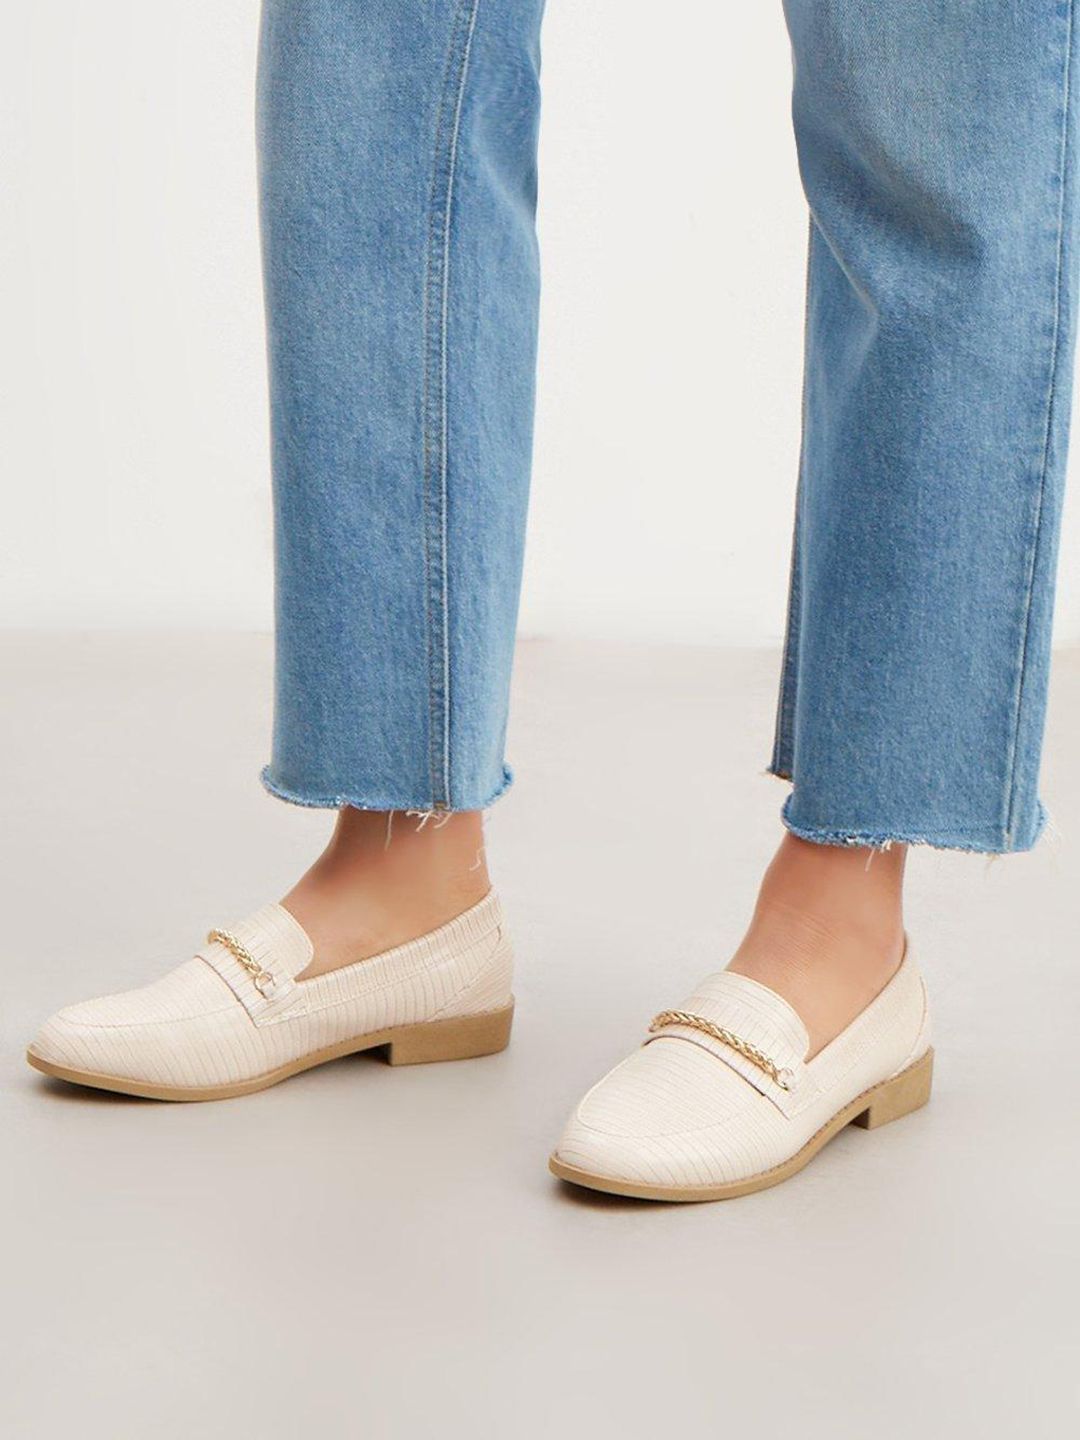 DOROTHY PERKINS Women Textured Loafers with Chain Detail Price in India